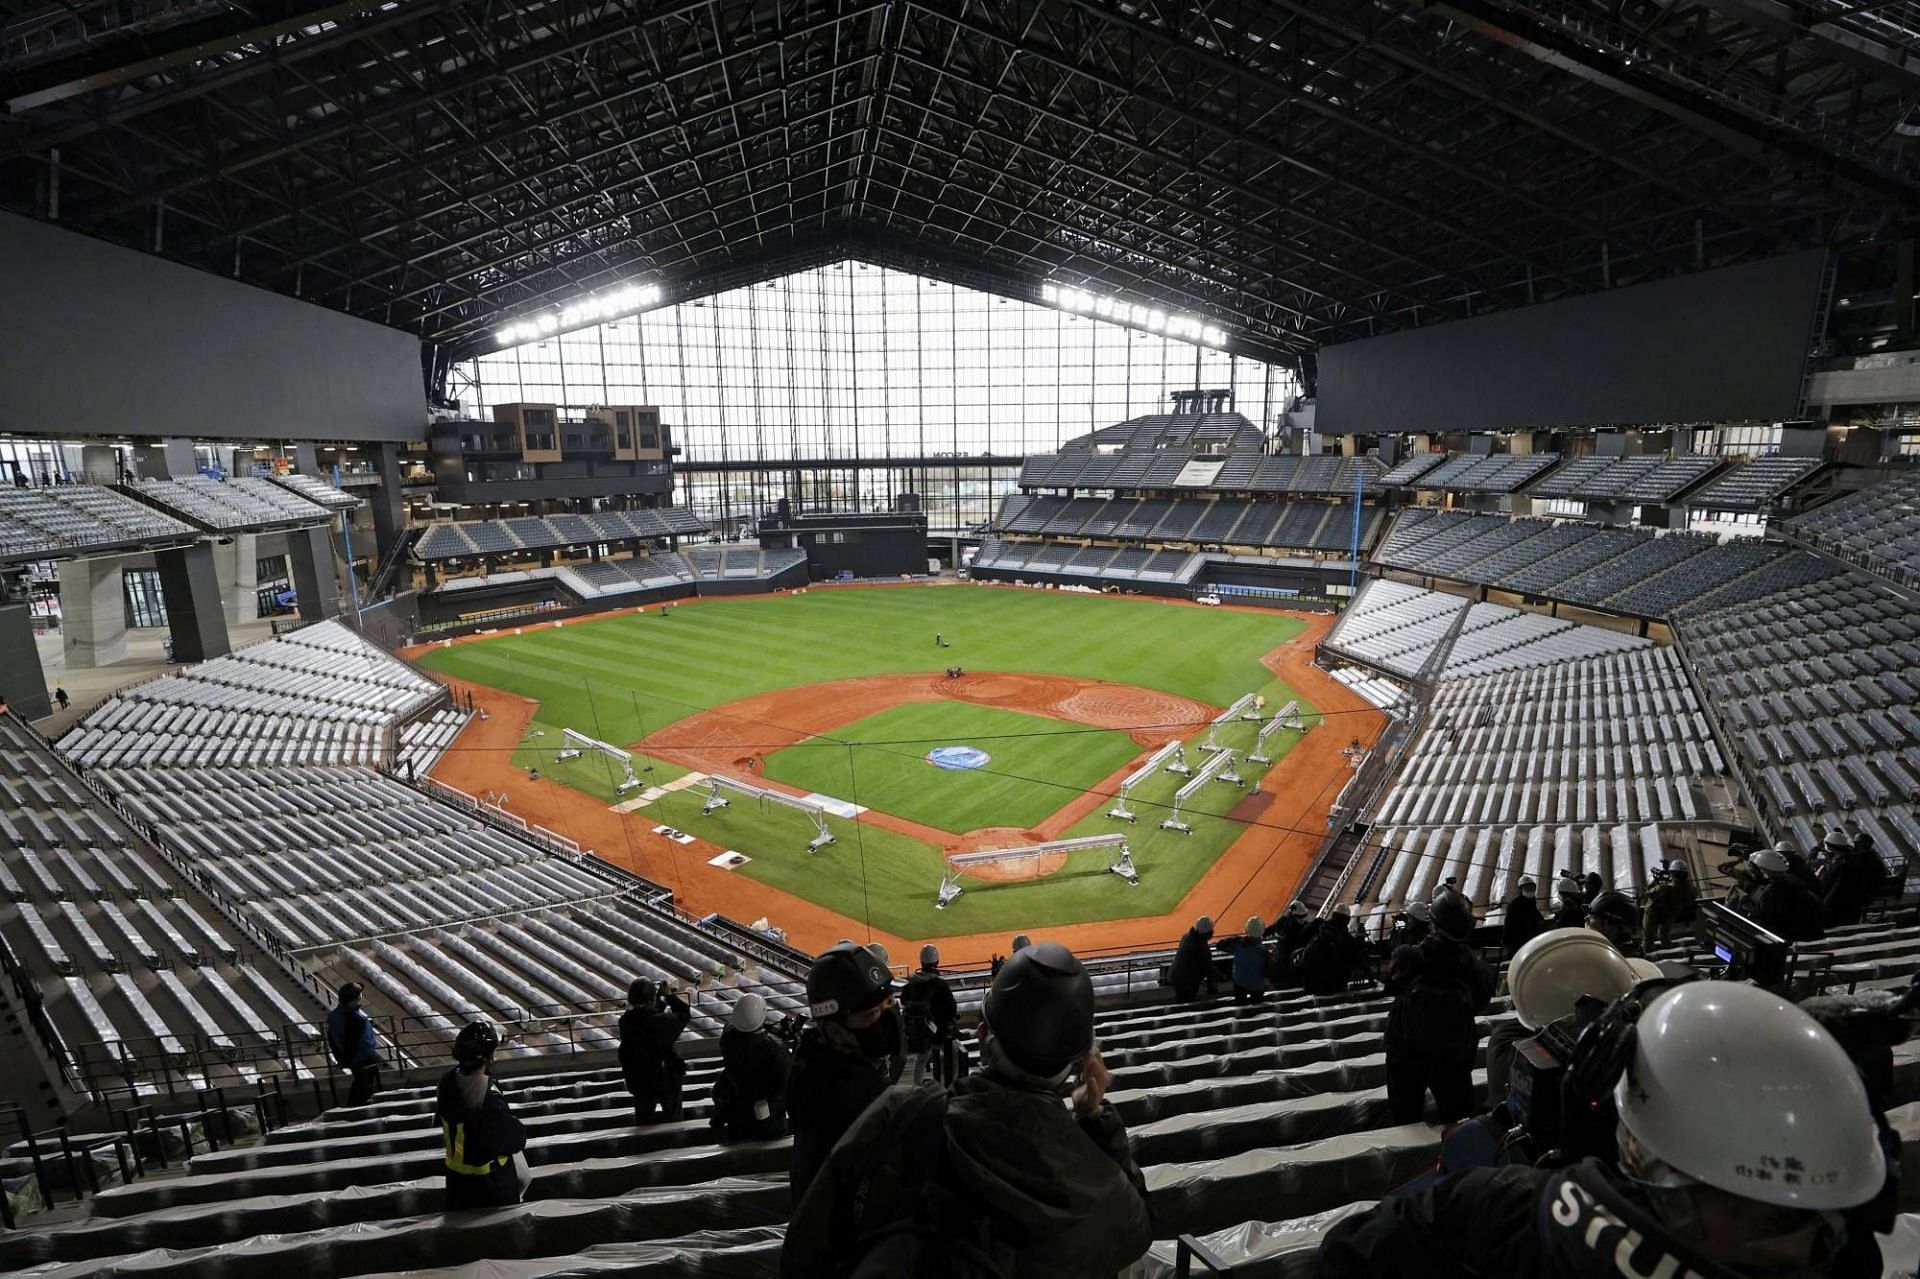 ES CON Field, the new home of the Hokkaido Nippon-Ham Fighters (Image from Kyodo)